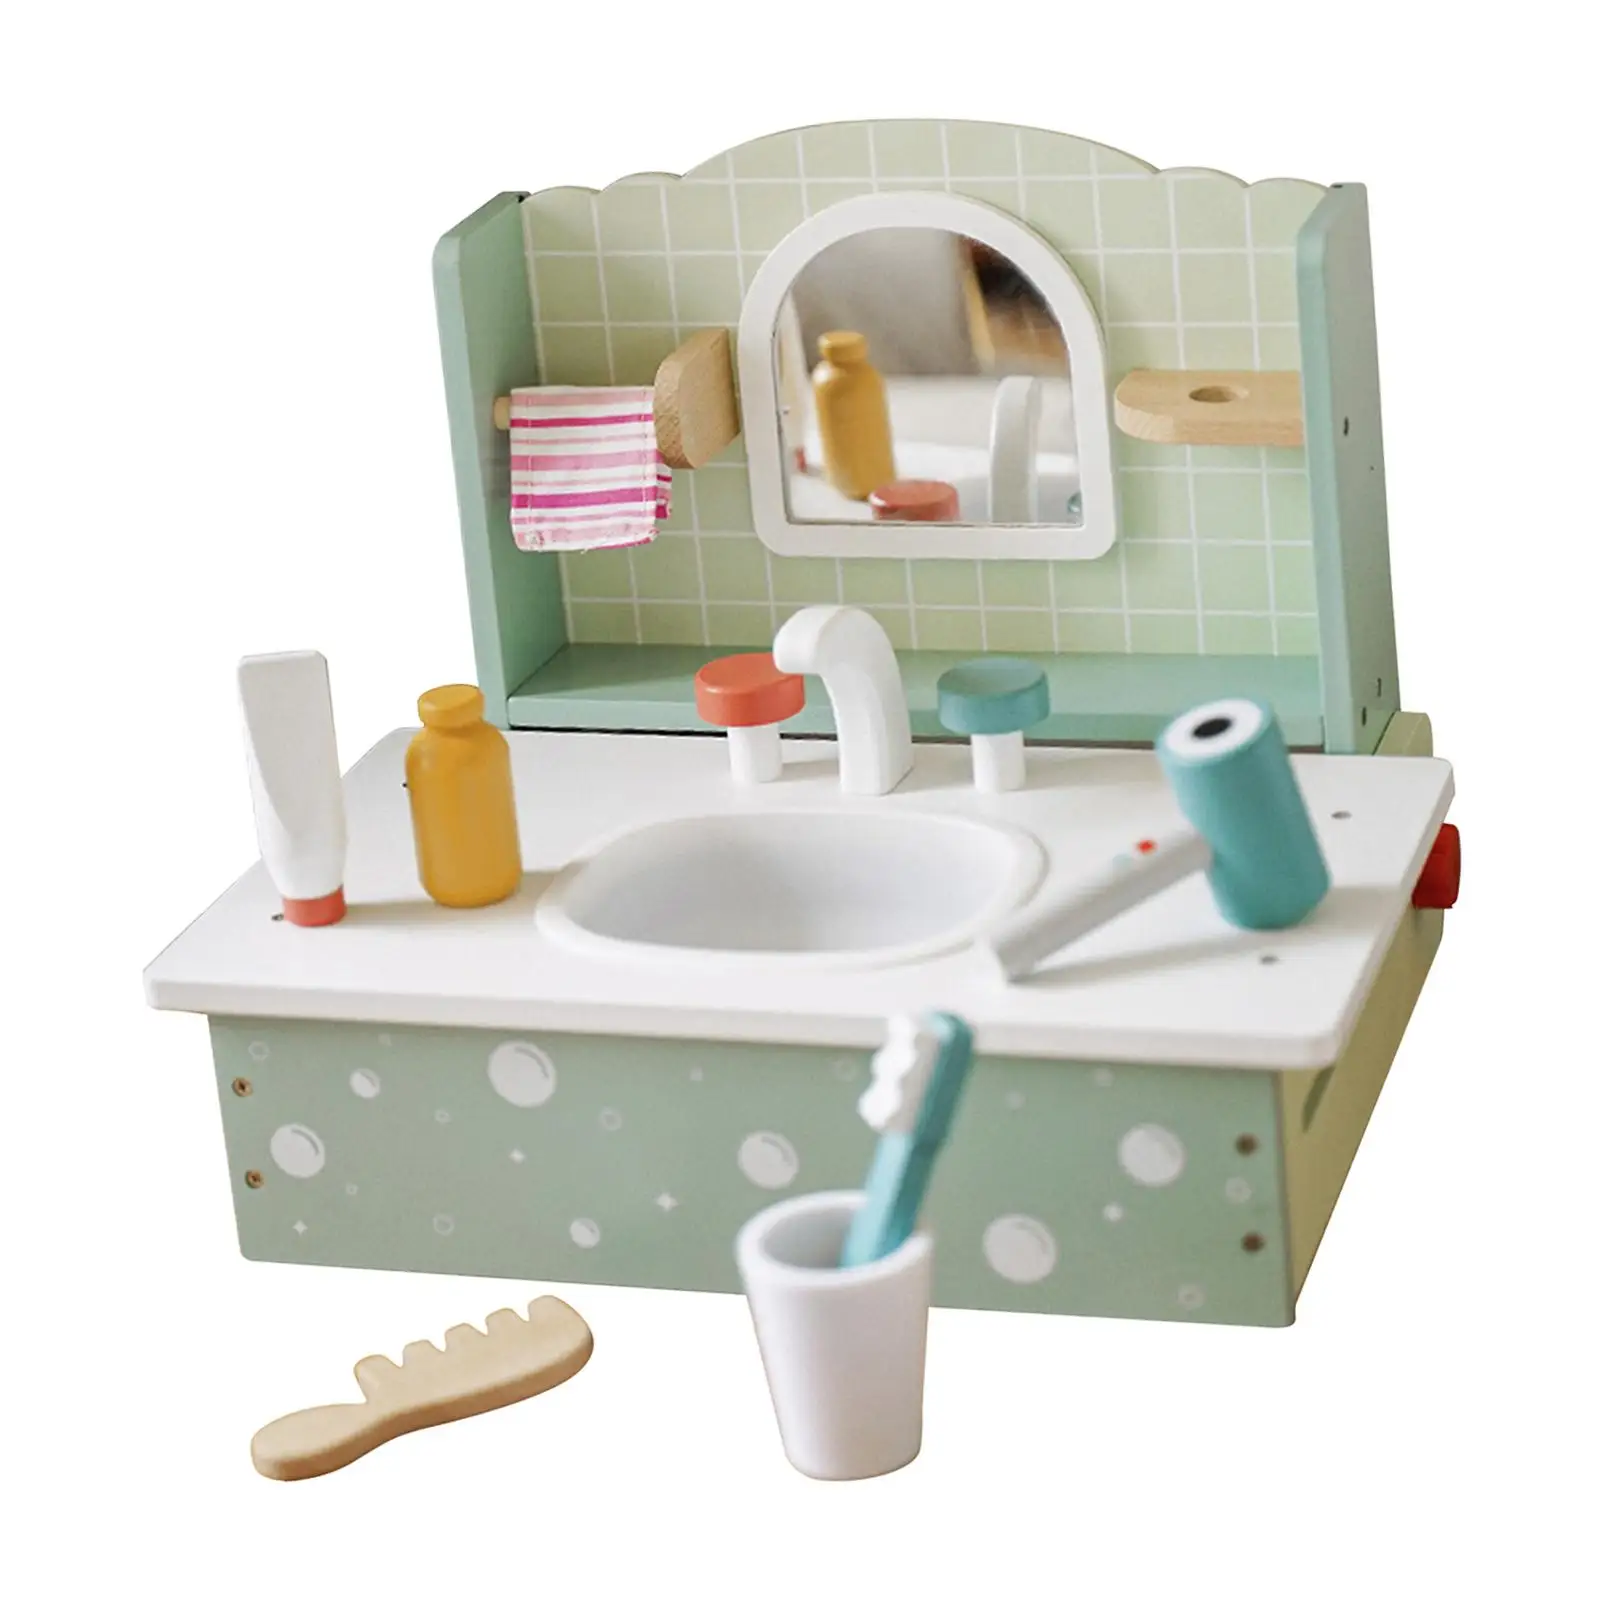 Makeup Beauty Dressing Table Washing Basin Toy Set Table Dresser Set Playset Kids Makeup Vanity Toy for Children Birthday Gifts